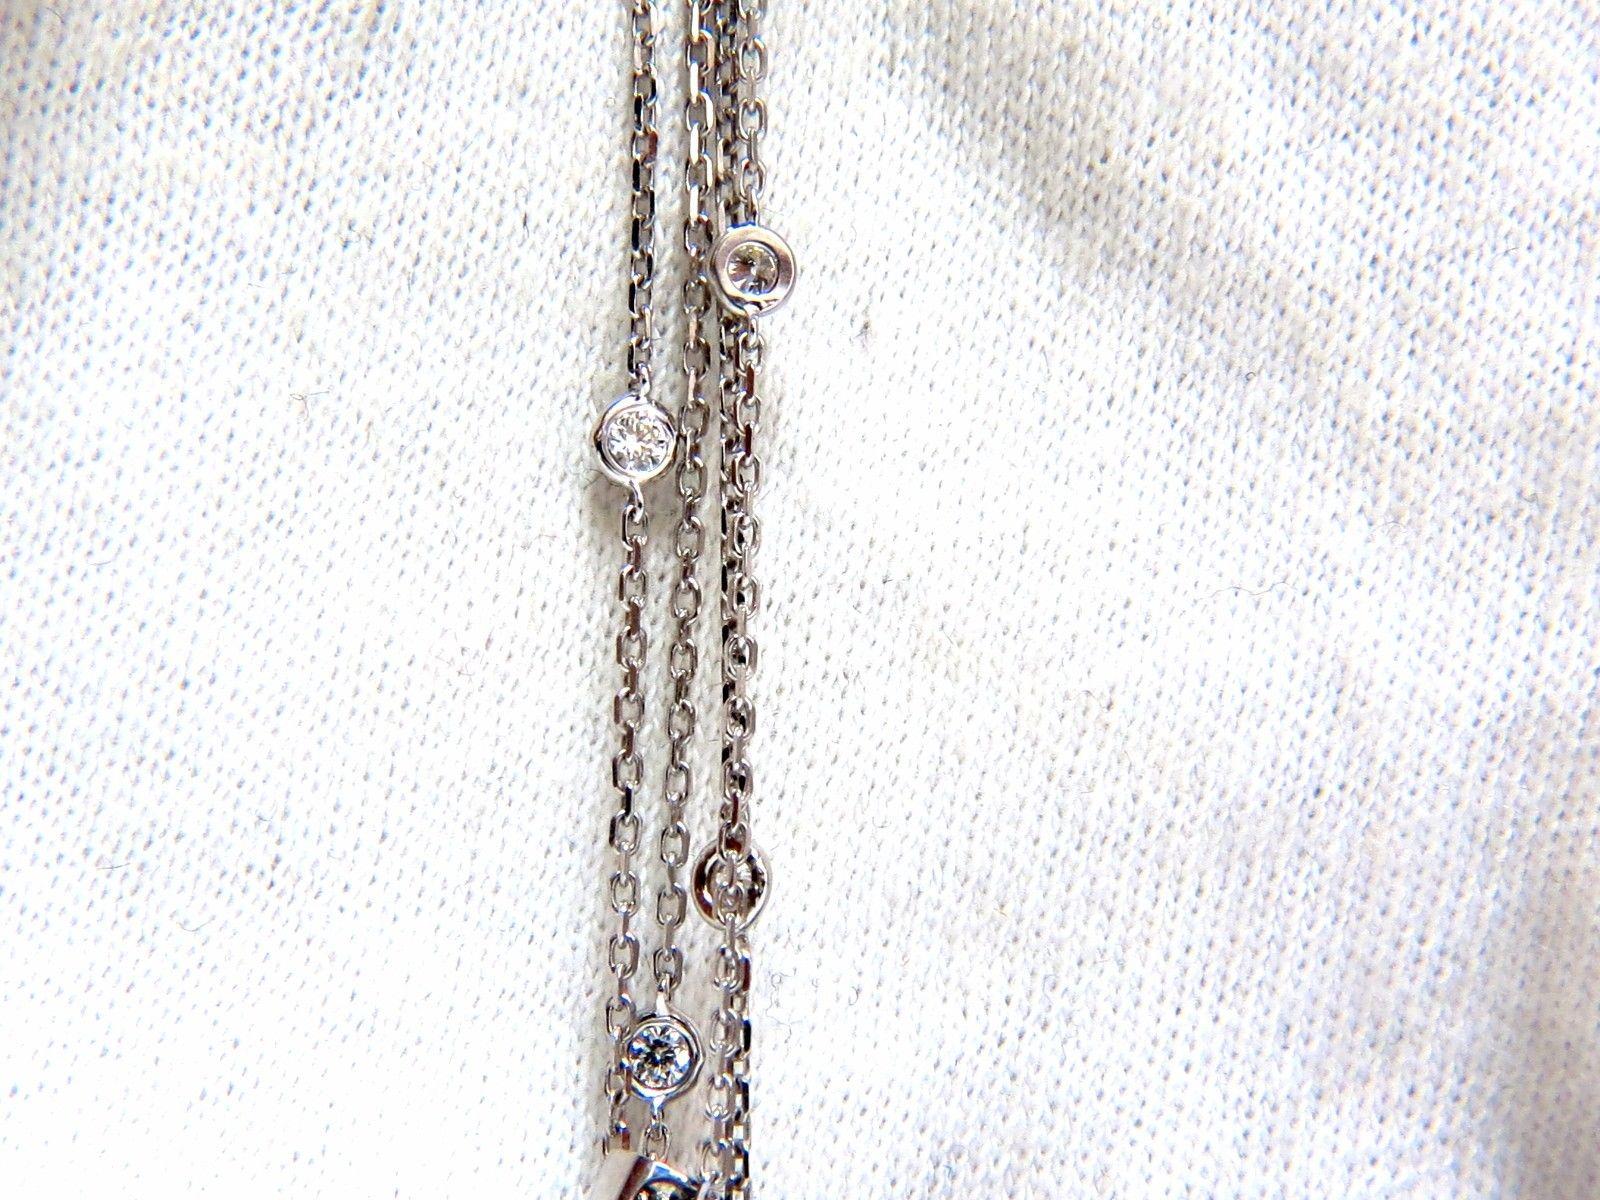 Chandelier Dangle Necklace



3.50ct. Natural round diamonds chandelier drop dangle pendant 

with diamond / station by yard necklace.

 Full cut brilliants.

 Vs-2  Clarity. 

G-colors.

18kt. white gold

20 grams.

Overall: 3.2 inch long

.75 inch